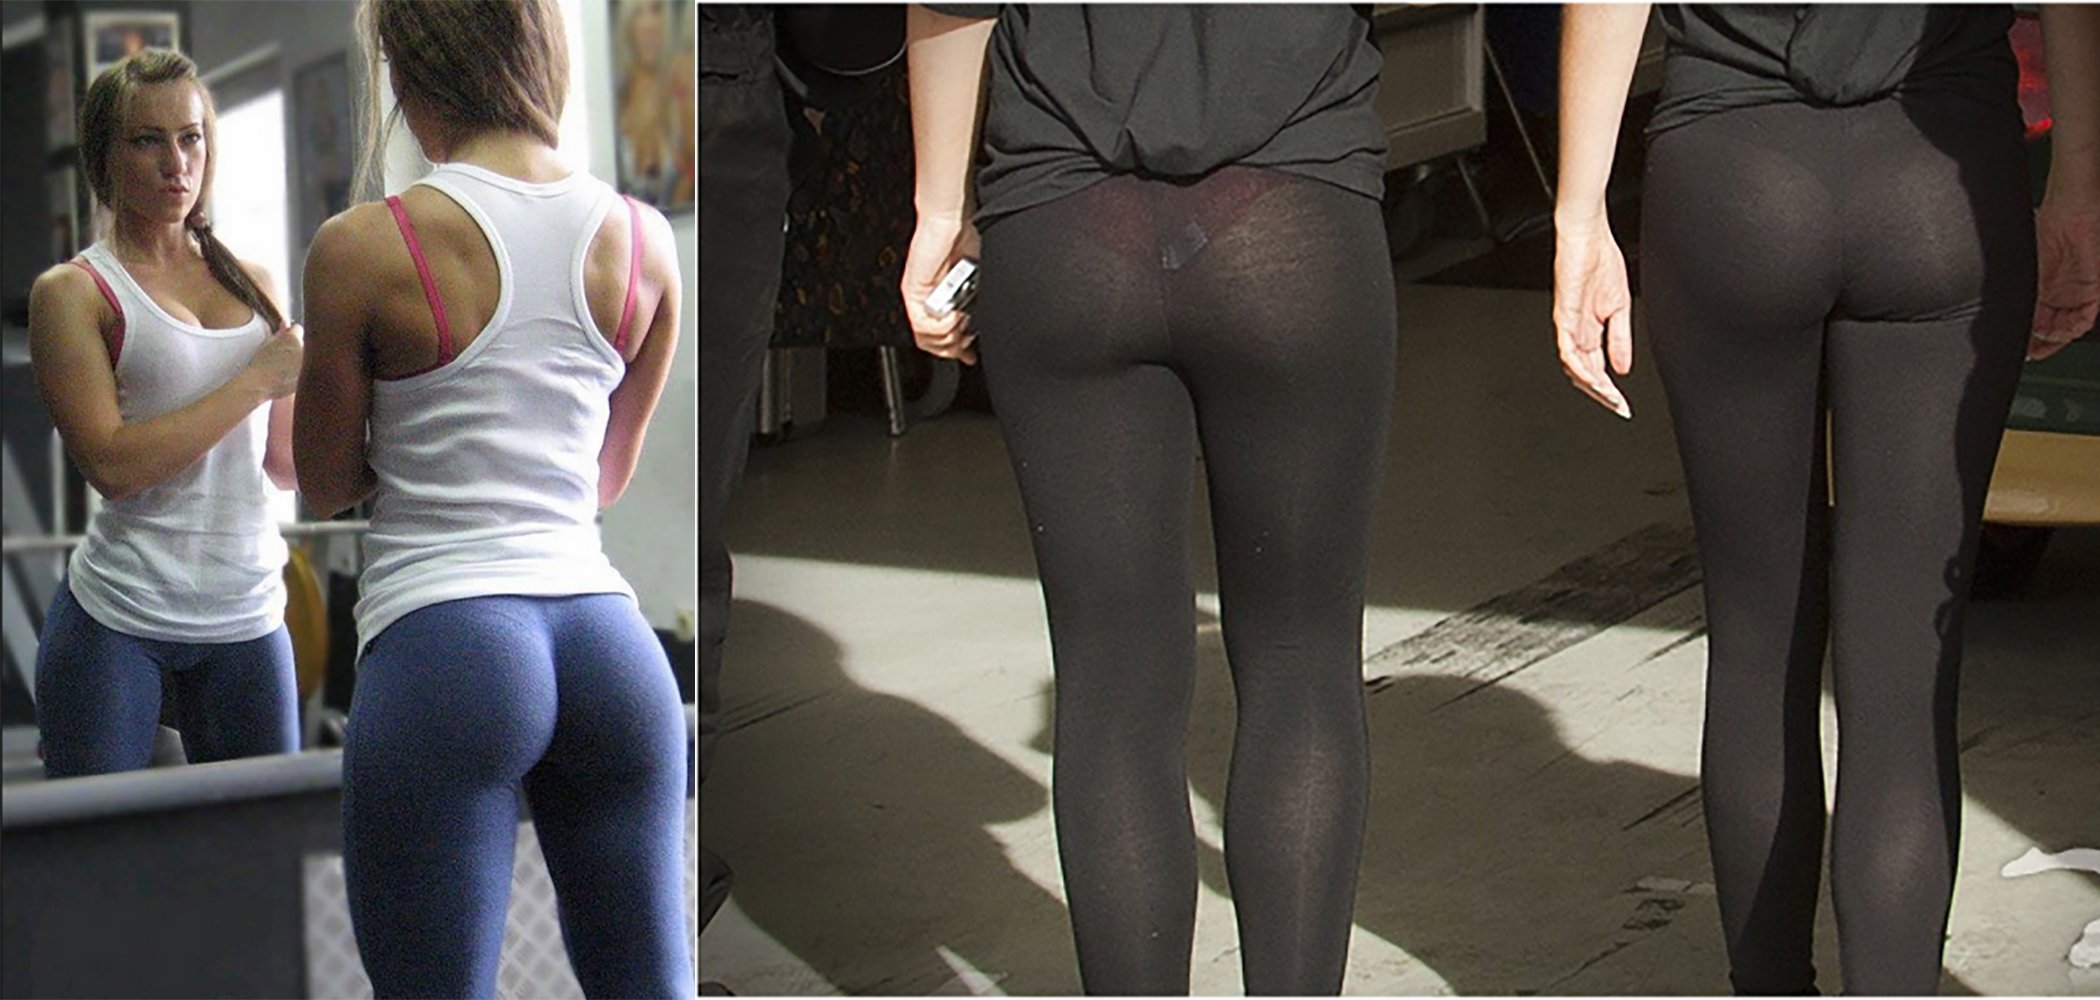 Any Tips For Leggings That Are See-through When Bending?